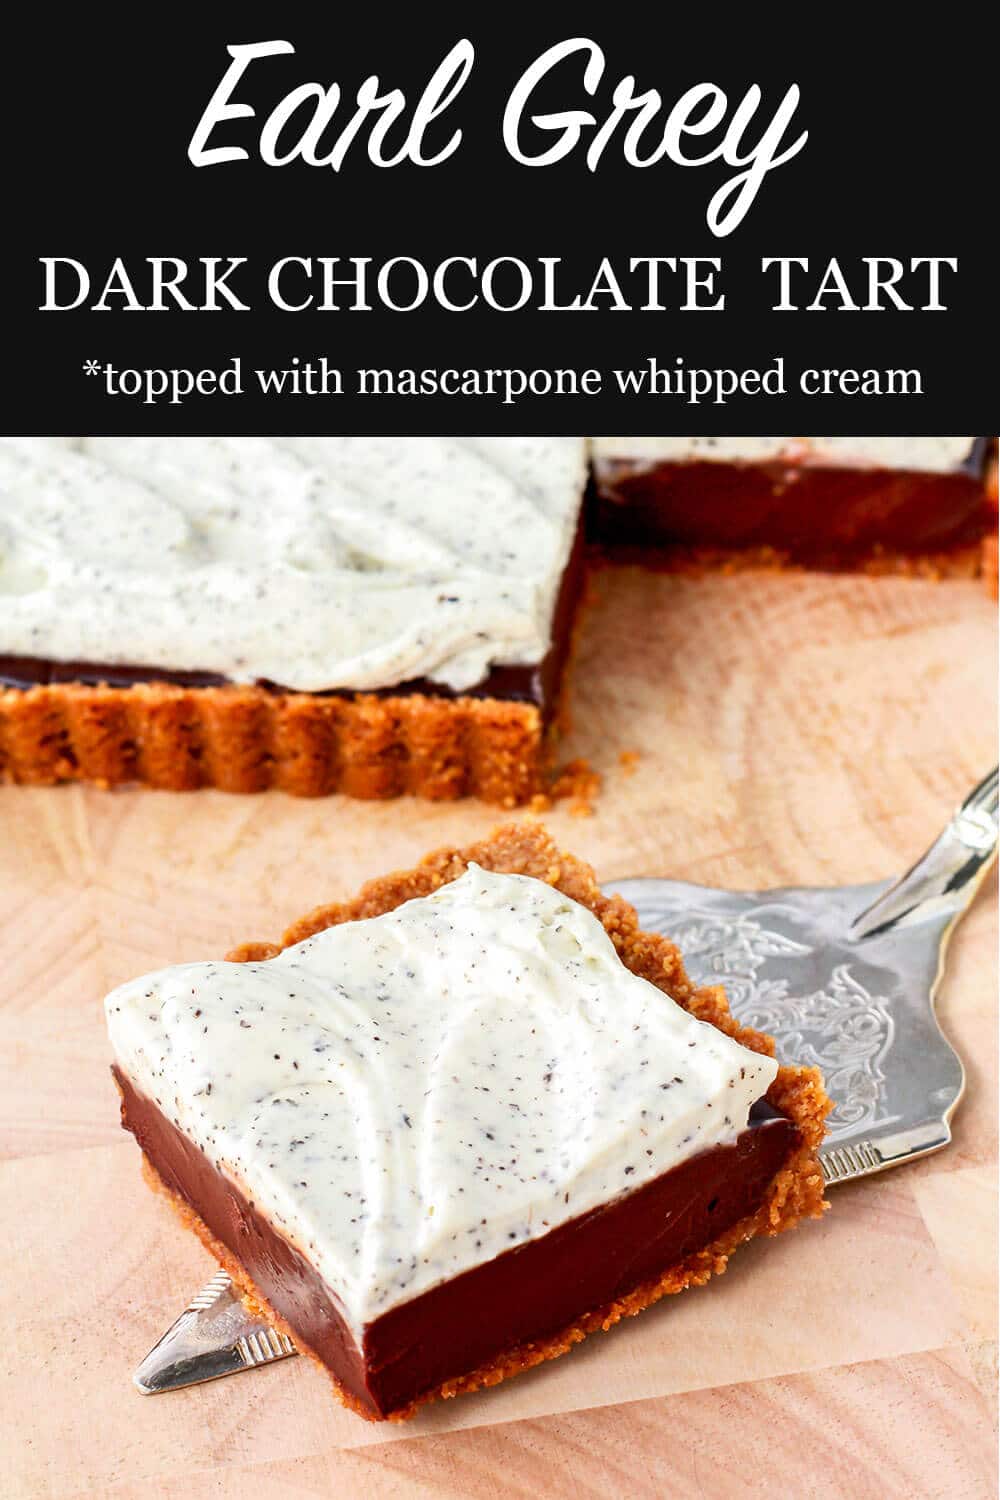 Square tart filled with dark chocolate ganache and topped with whipped cream flecked with Earl Grey tea leaves